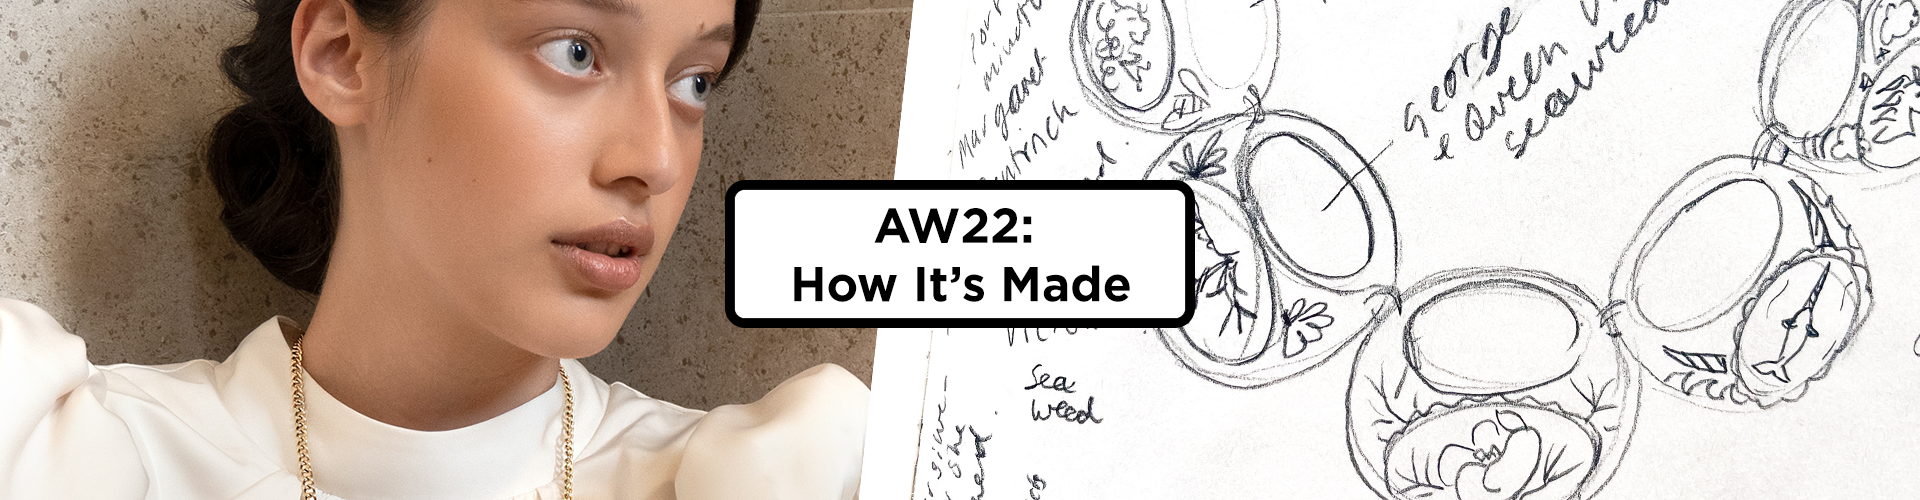 AW22: How It's Made